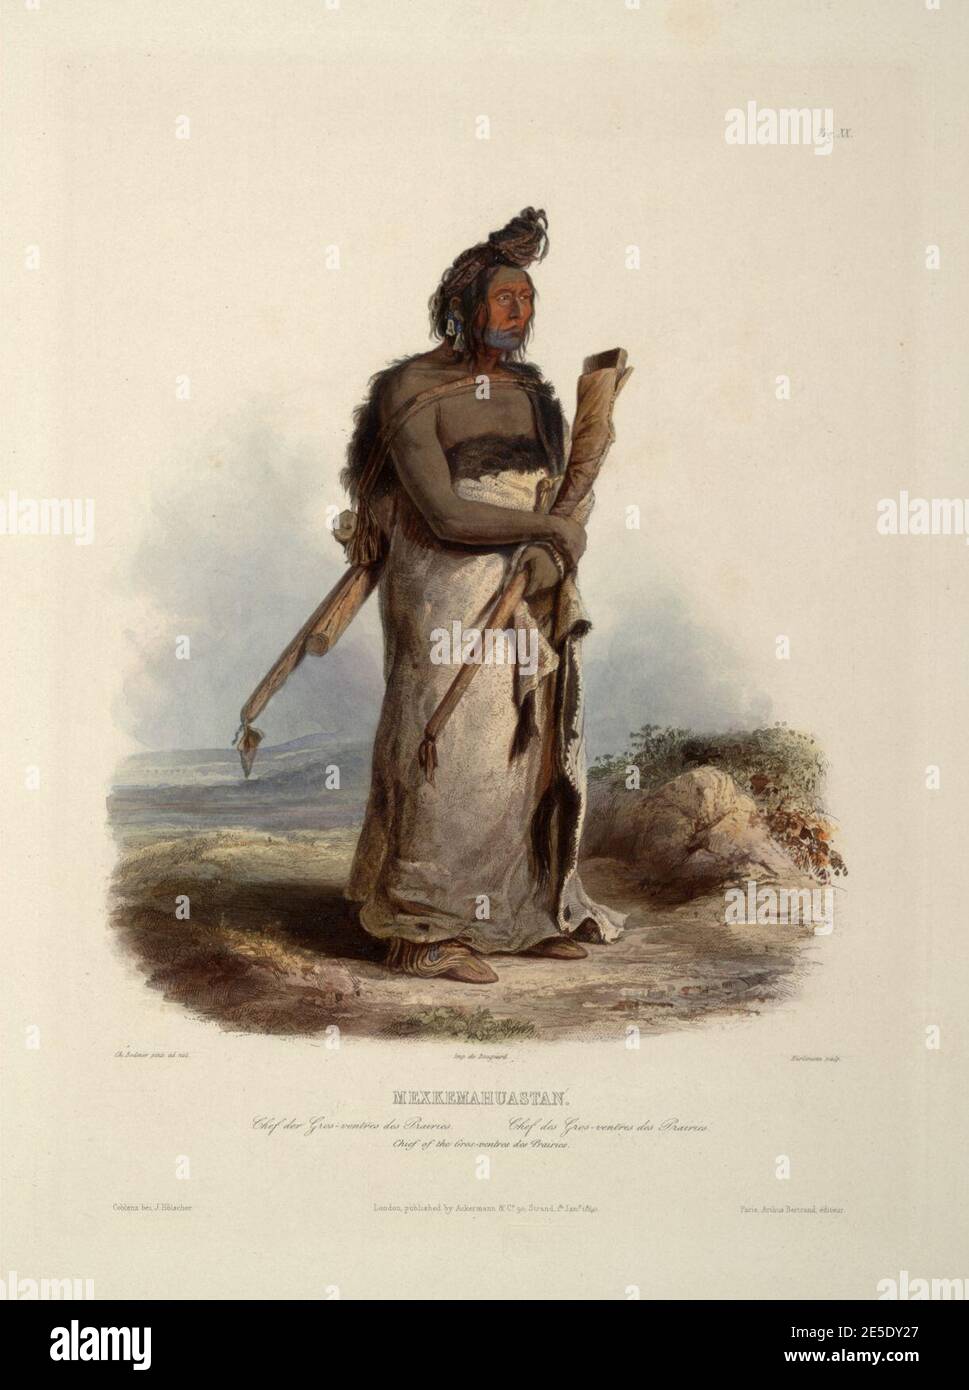 Mexkemahuastan Chief of the Gros-ventres des Praires Chief of the Bigbellies of the prarie 0020v. Stock Photo